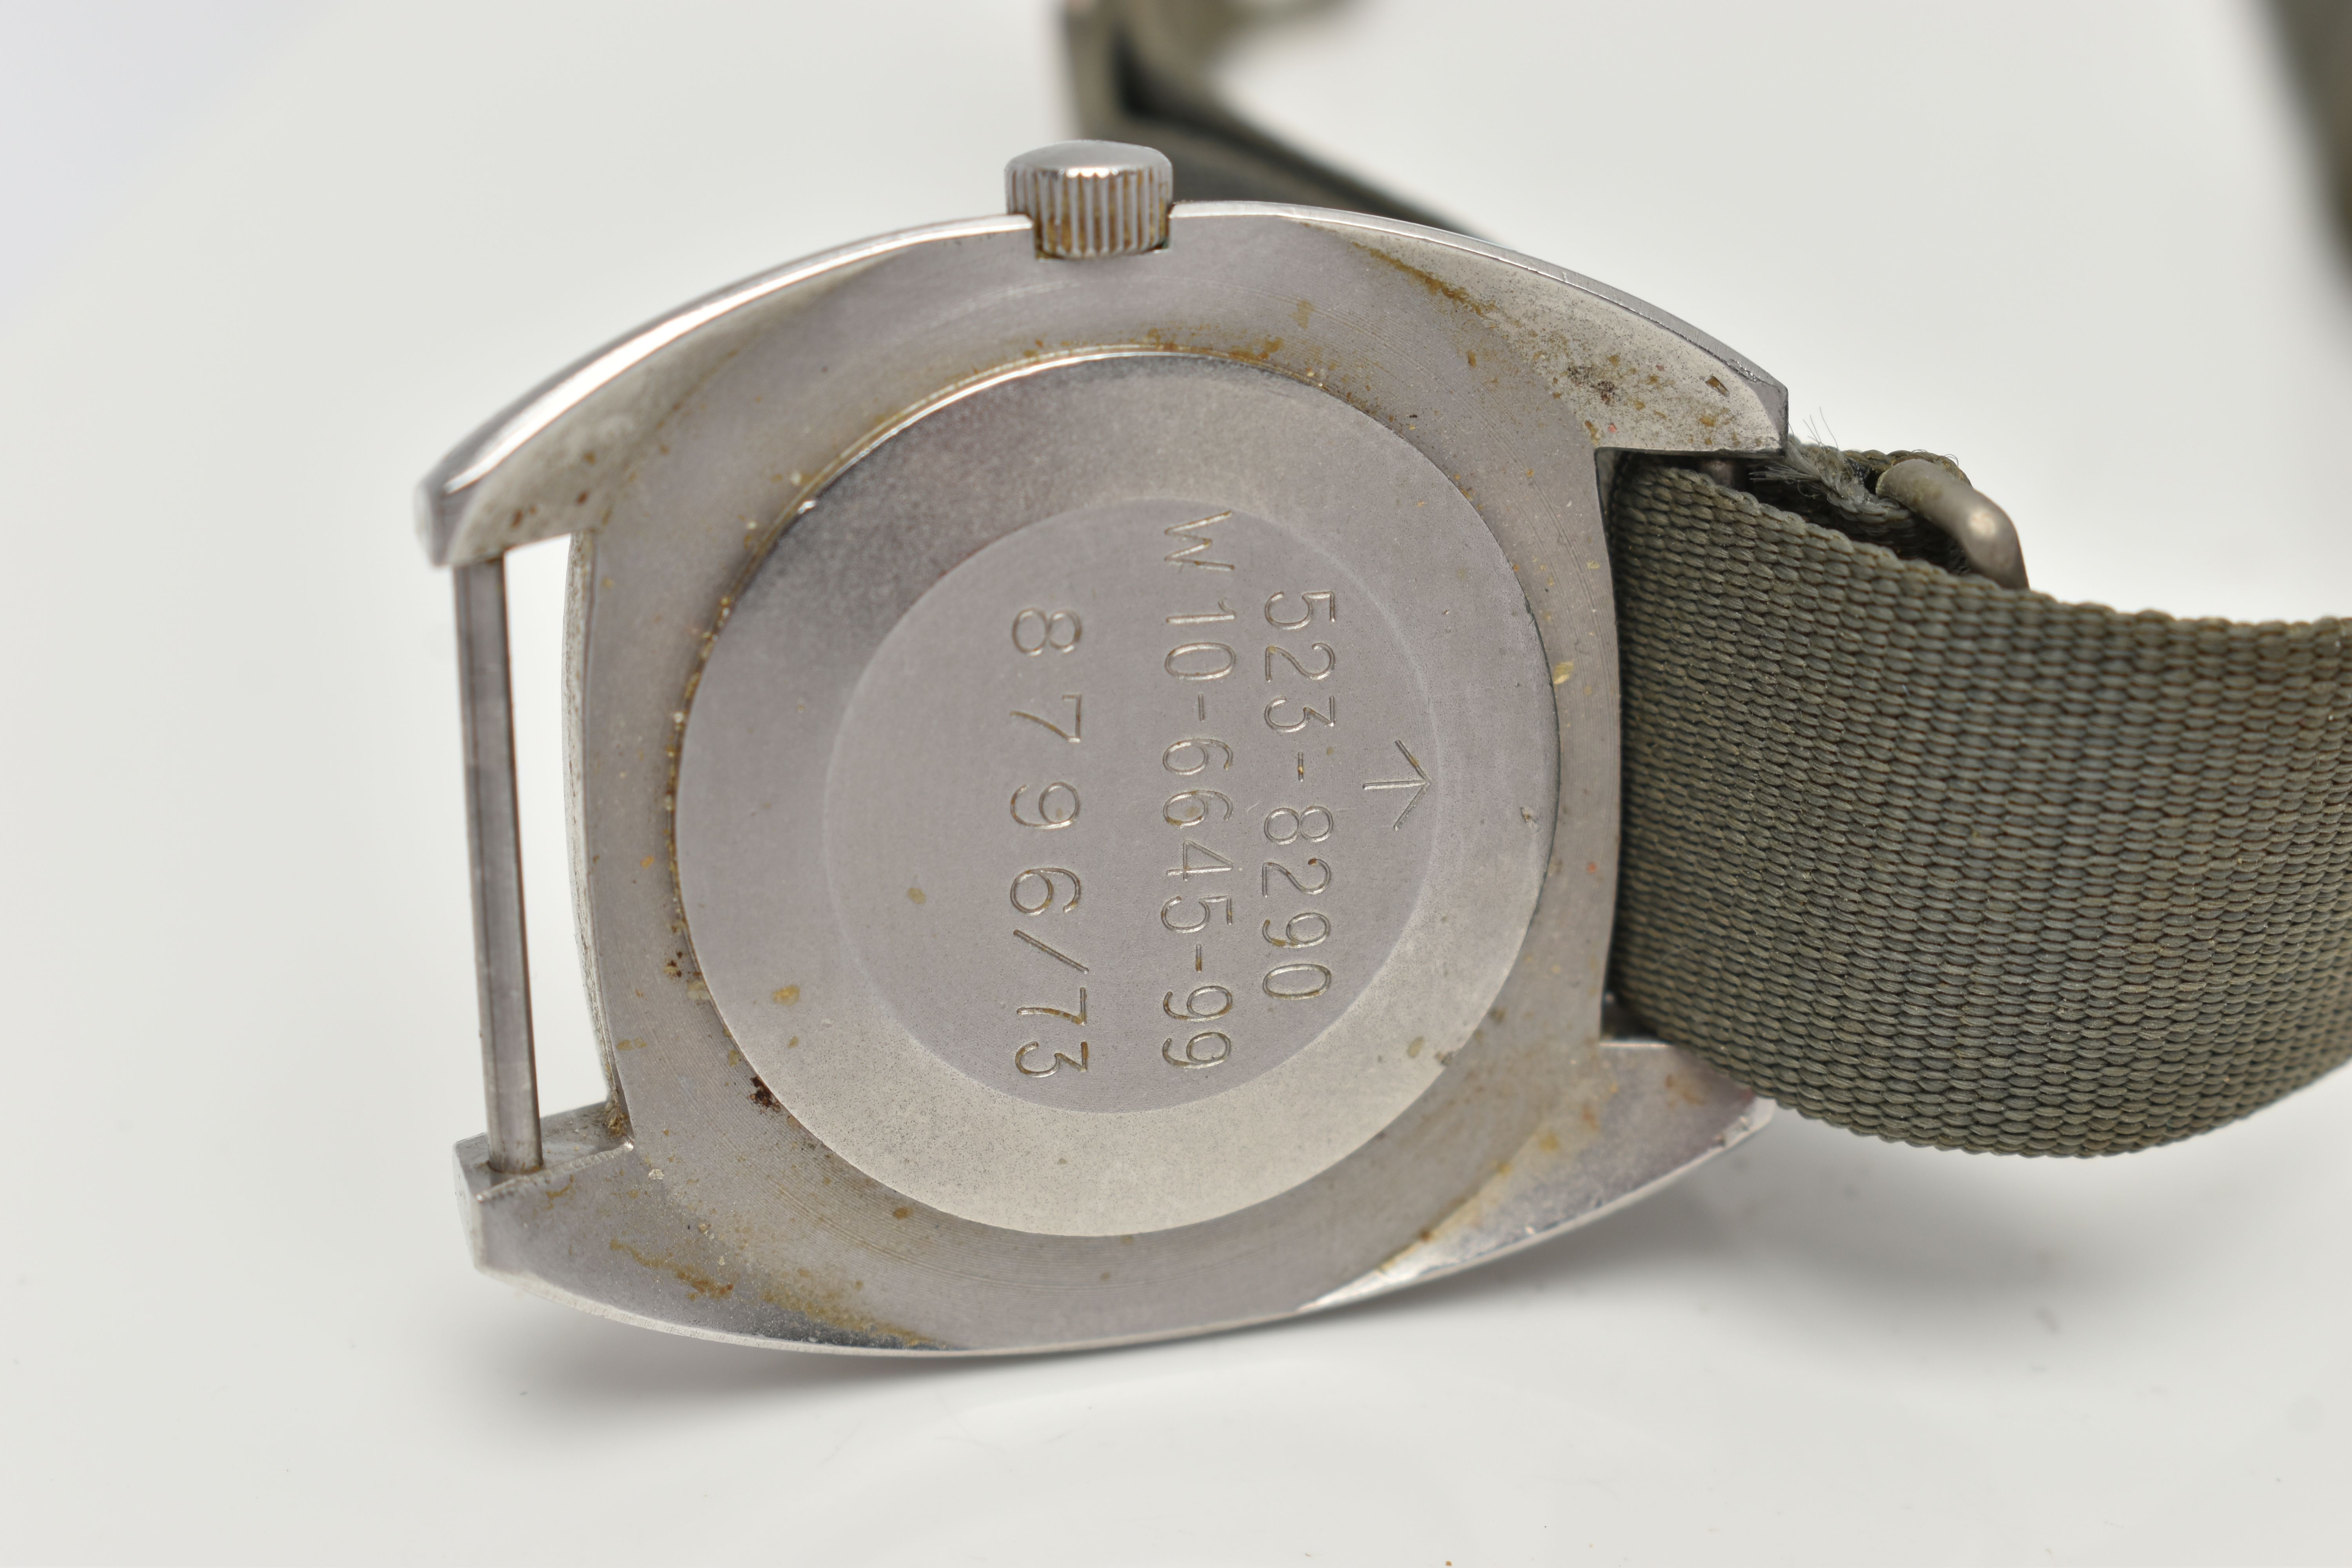 A VINTAGE HAMILTON BRITISH MILITARY ISSUE WRISTWATCH WITH BROAD ARROW SYMBOL, matt black dial with - Image 5 of 6